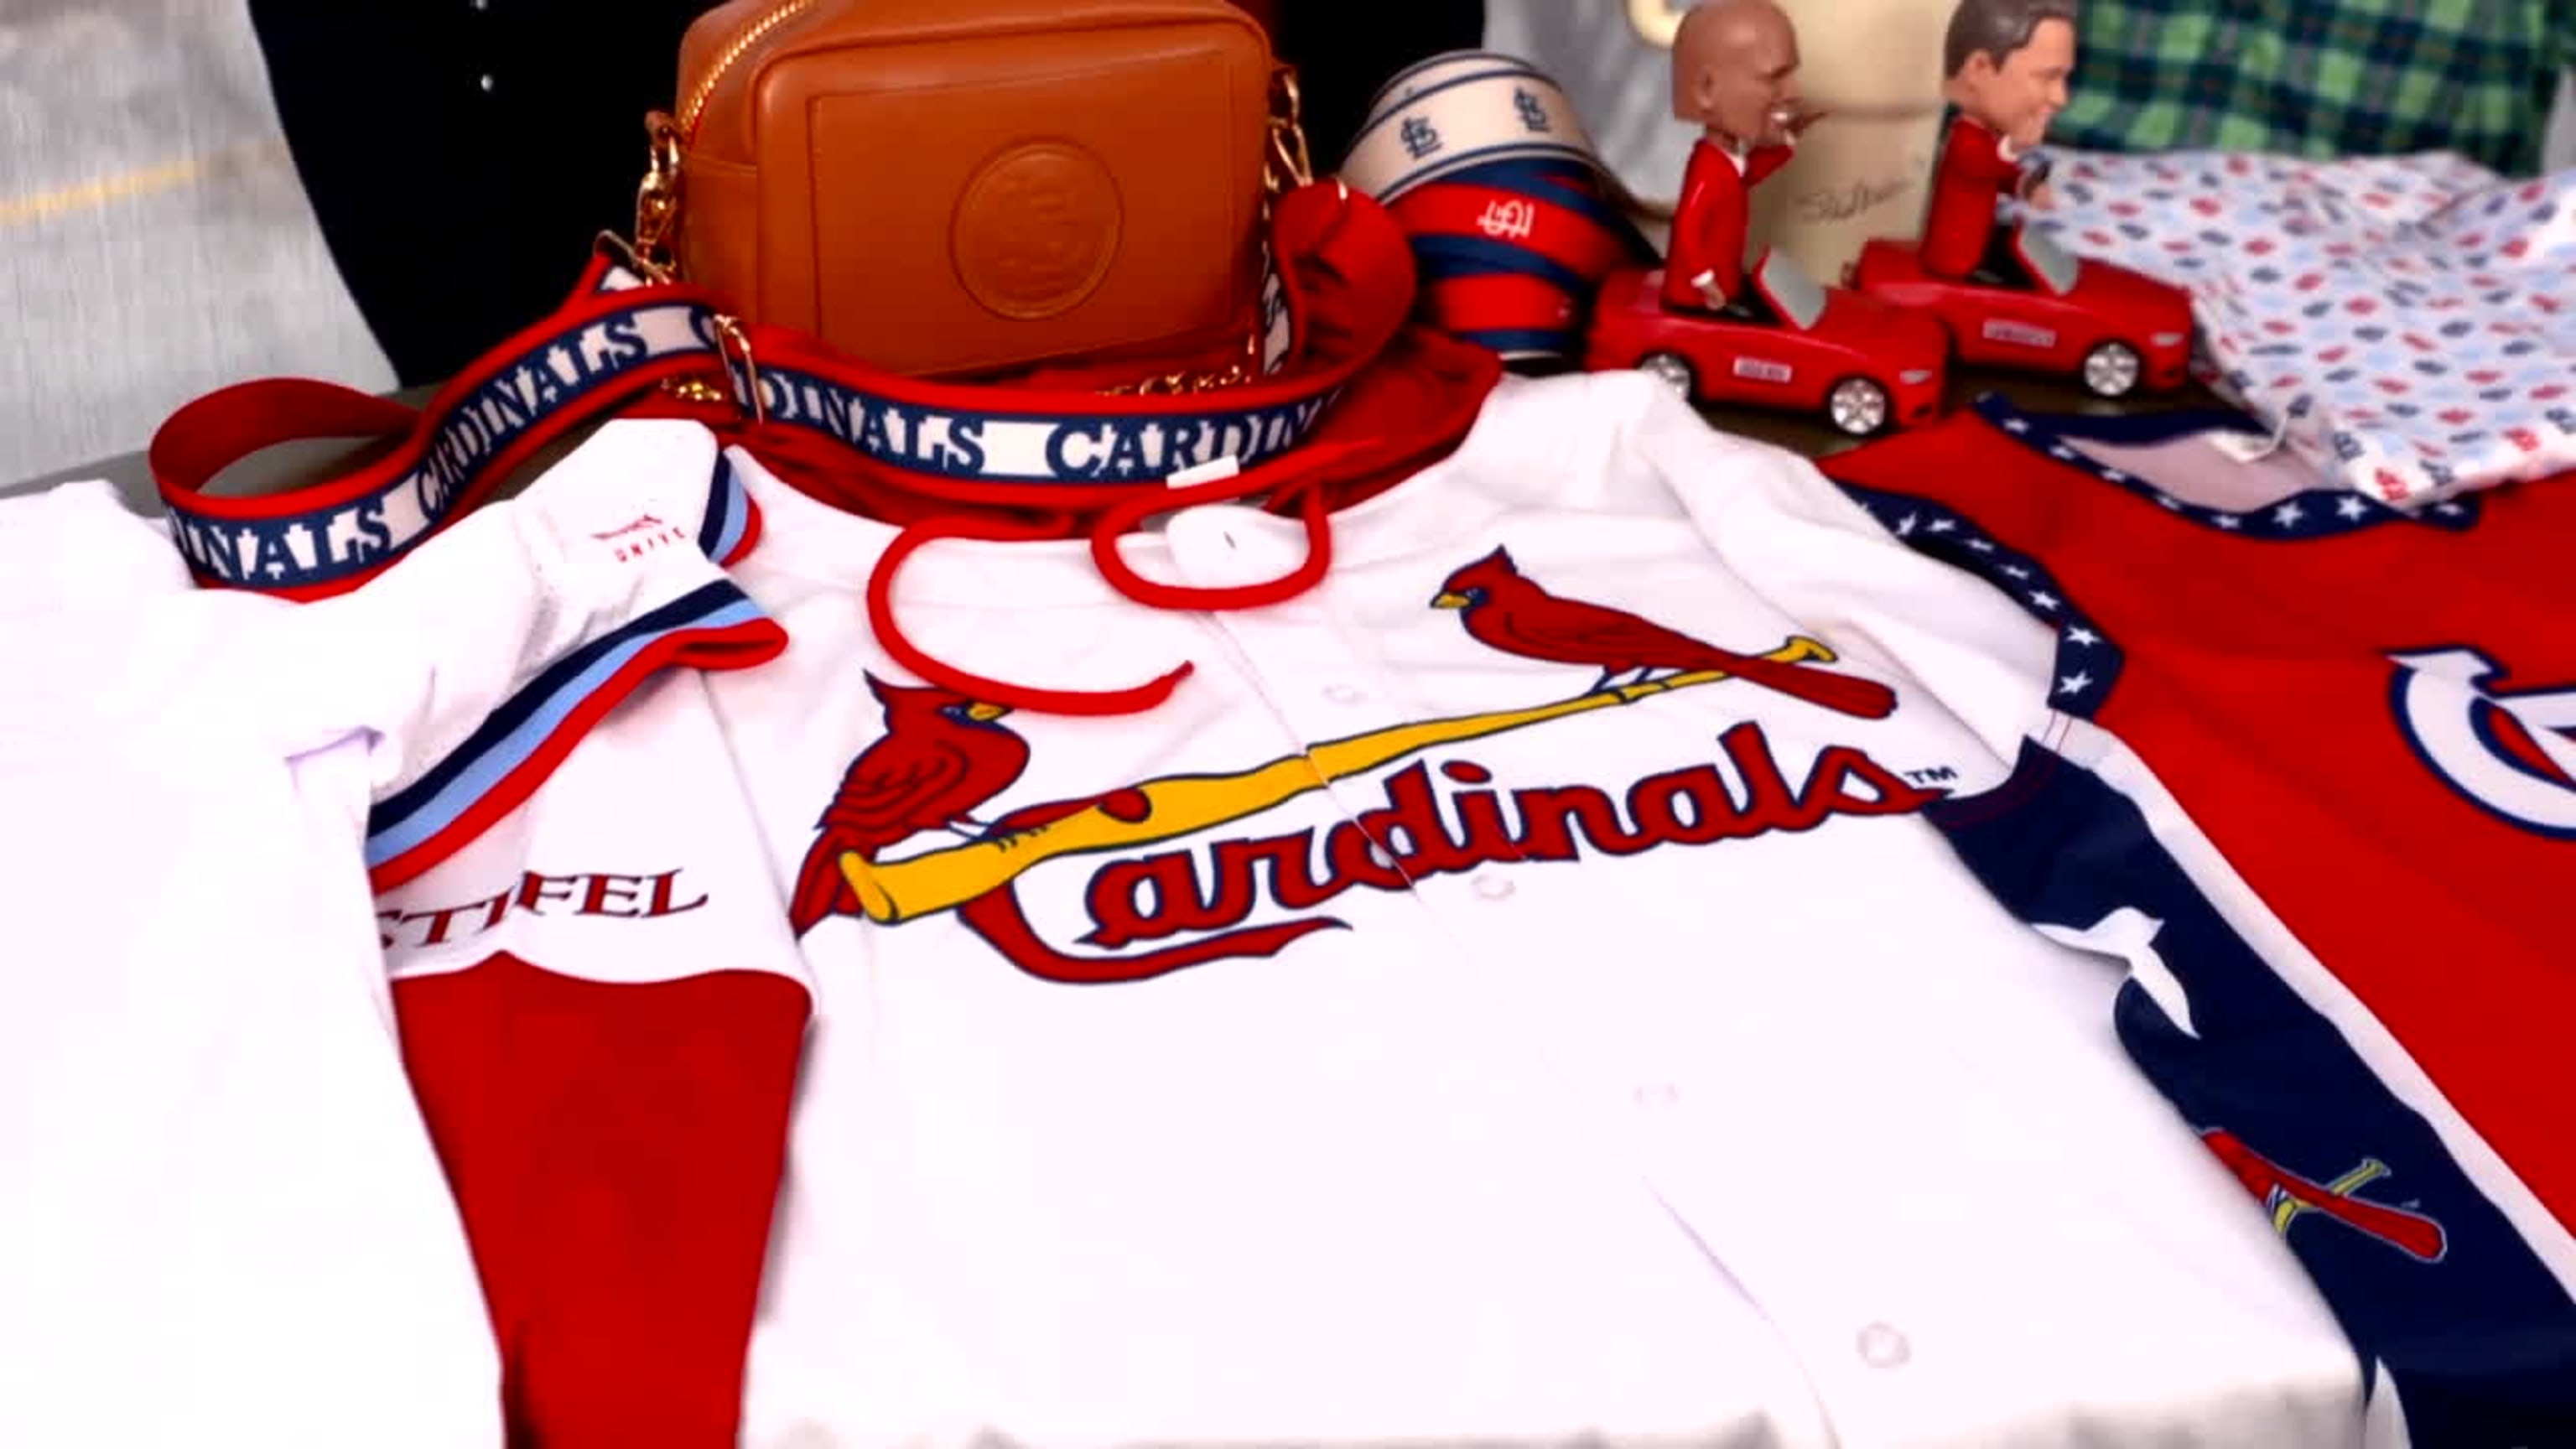 st louis cardinals mlb jersey gifts